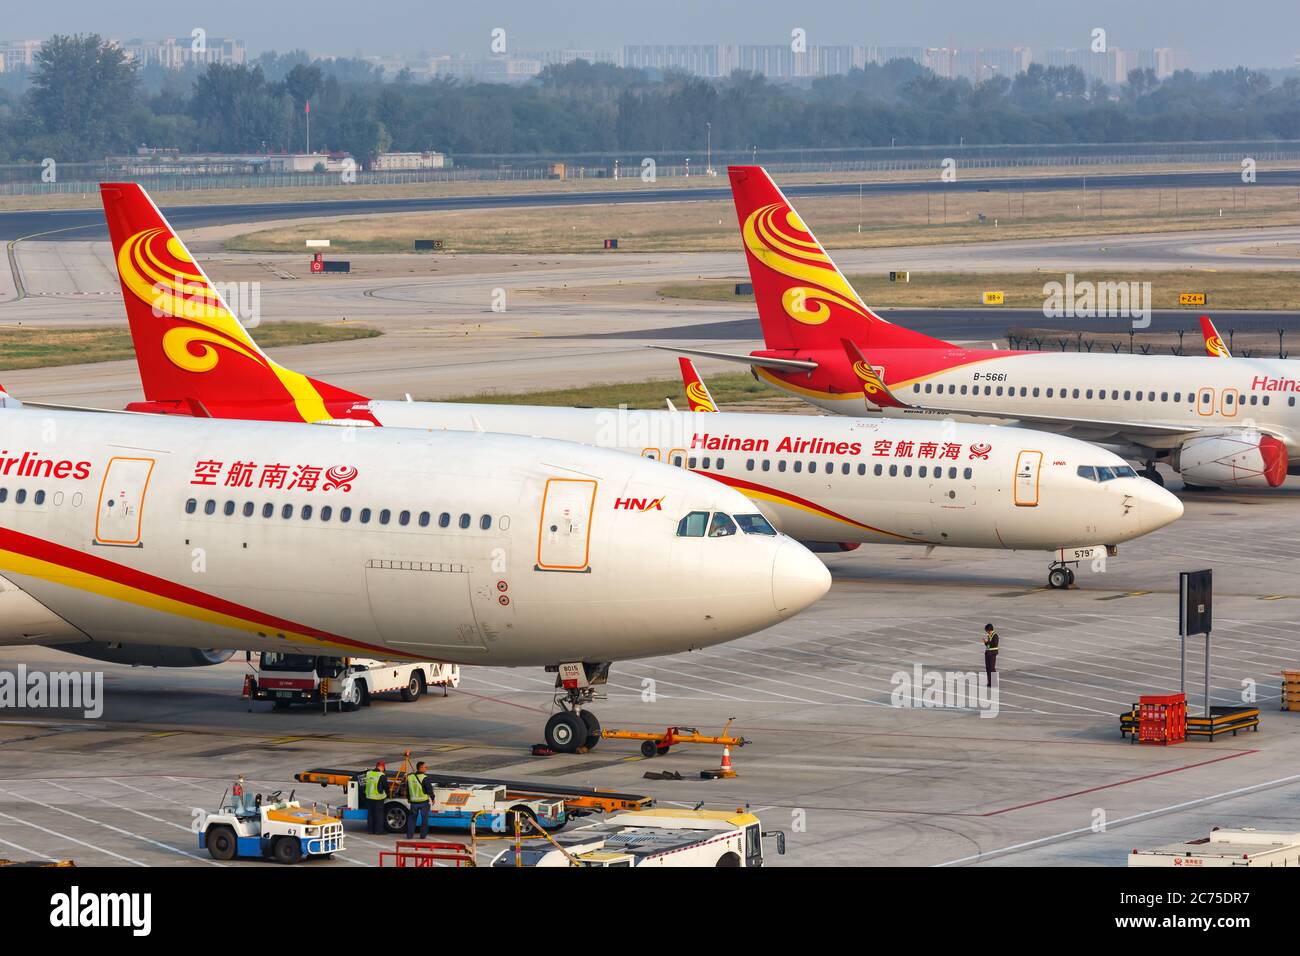 Beijing, China - October 2, 2019: Hainan Airlines Airbus A330-300 airplane at Beijing Capital airport (PEK) in China. Airbus is a European aircraft ma Stock Photo